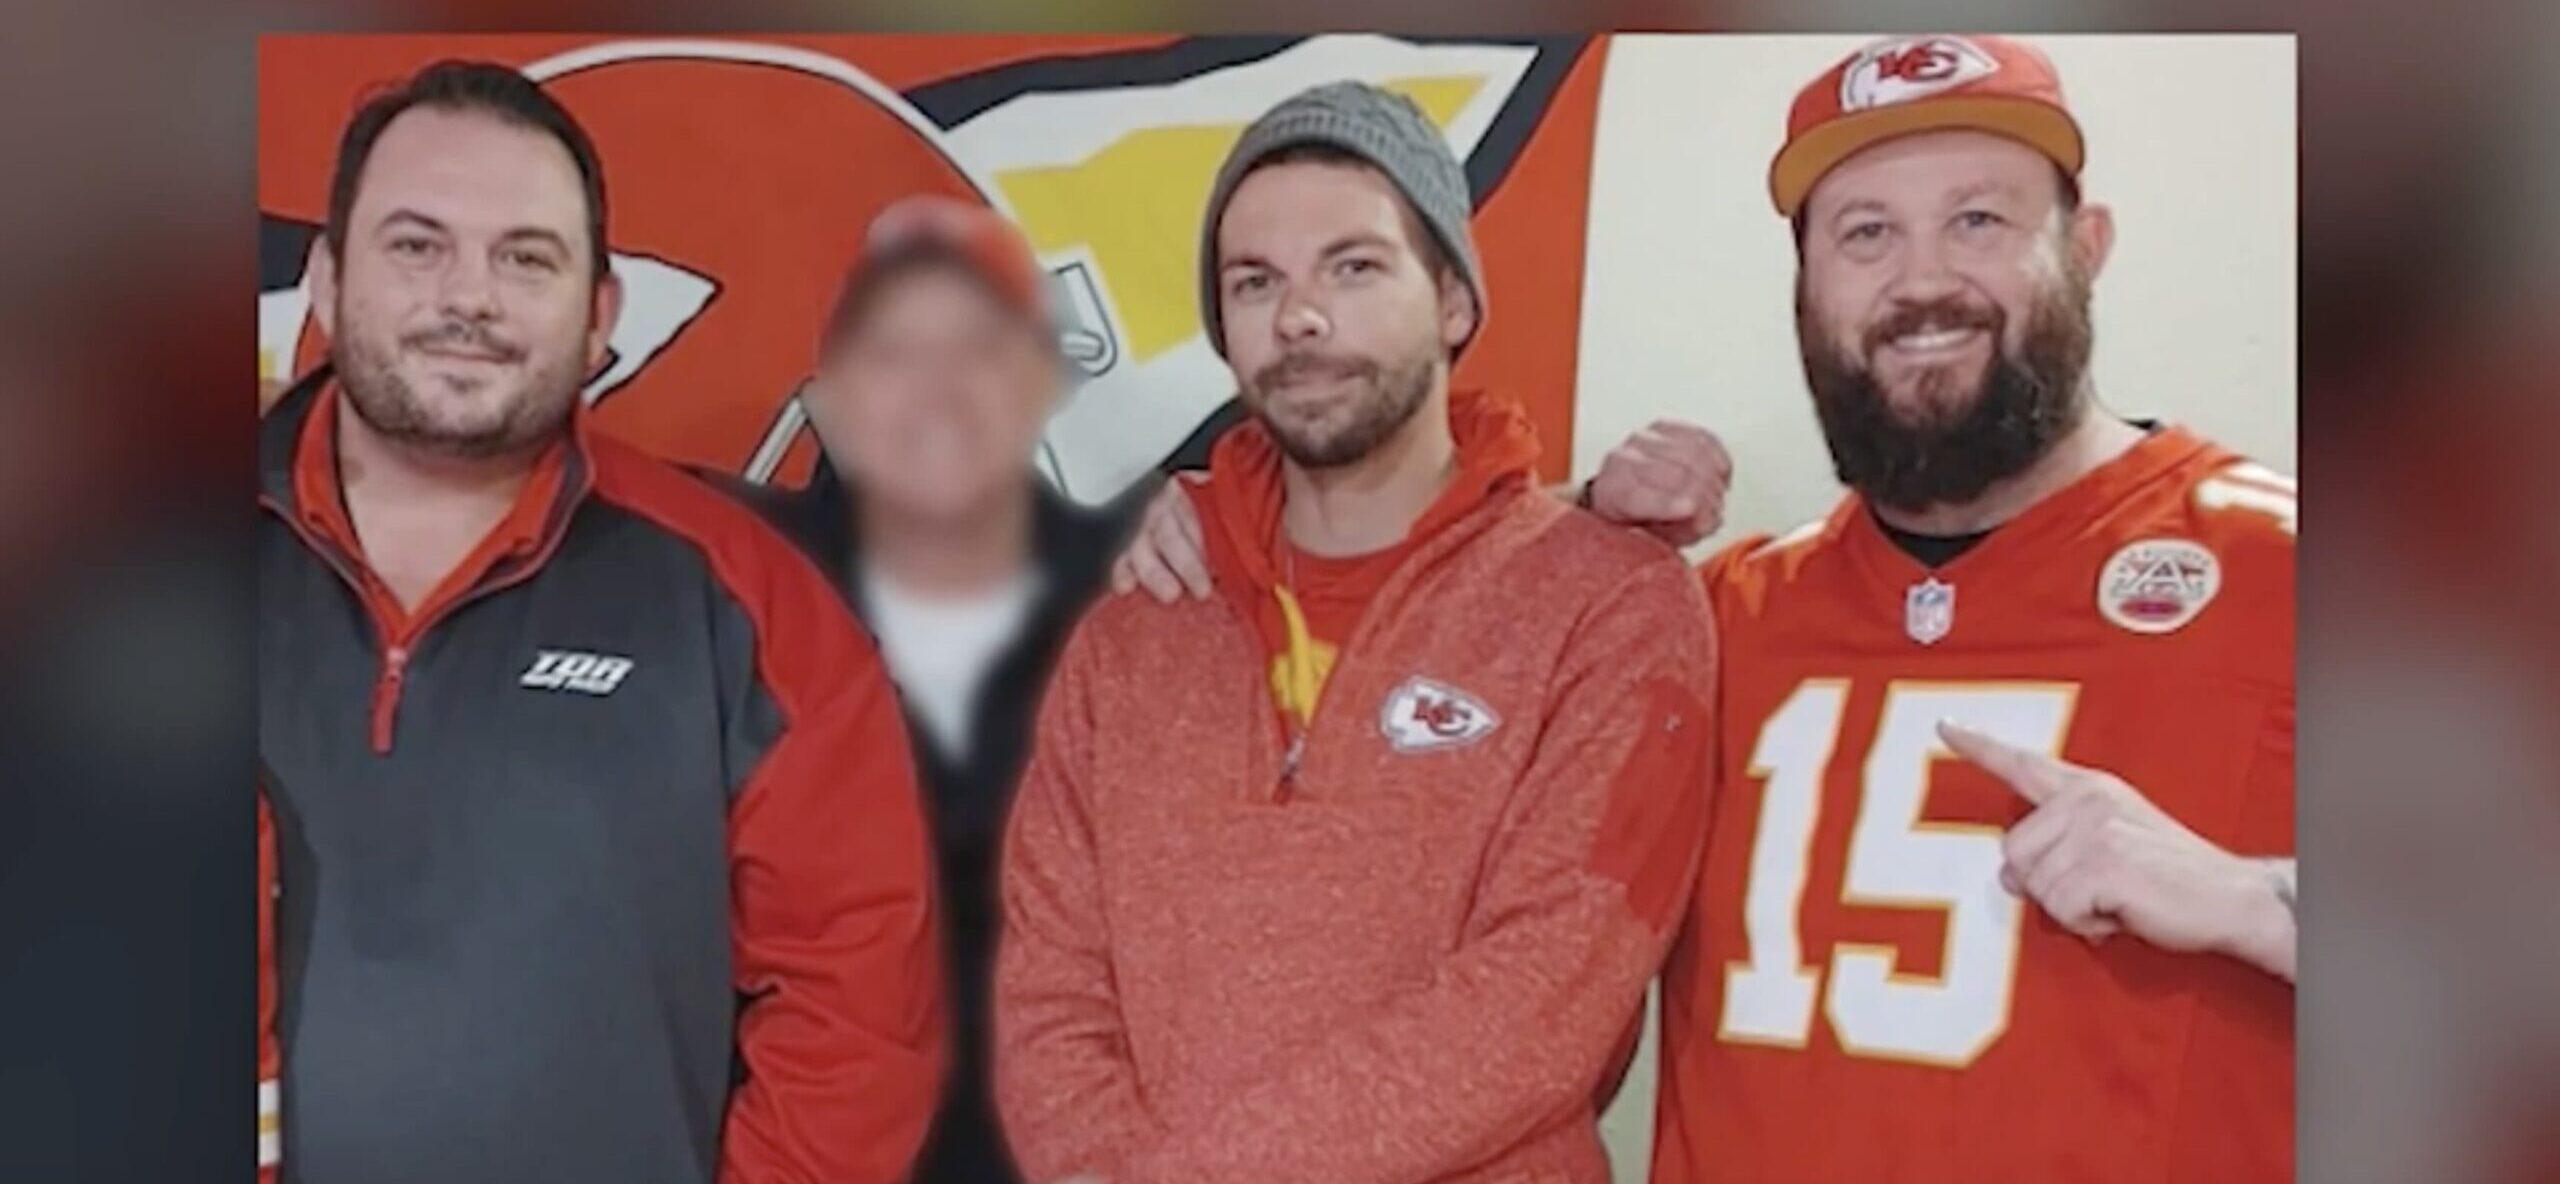 Lawyer For Late Chiefs Fan Questions Story Behind ‘Unusual’ Deaths